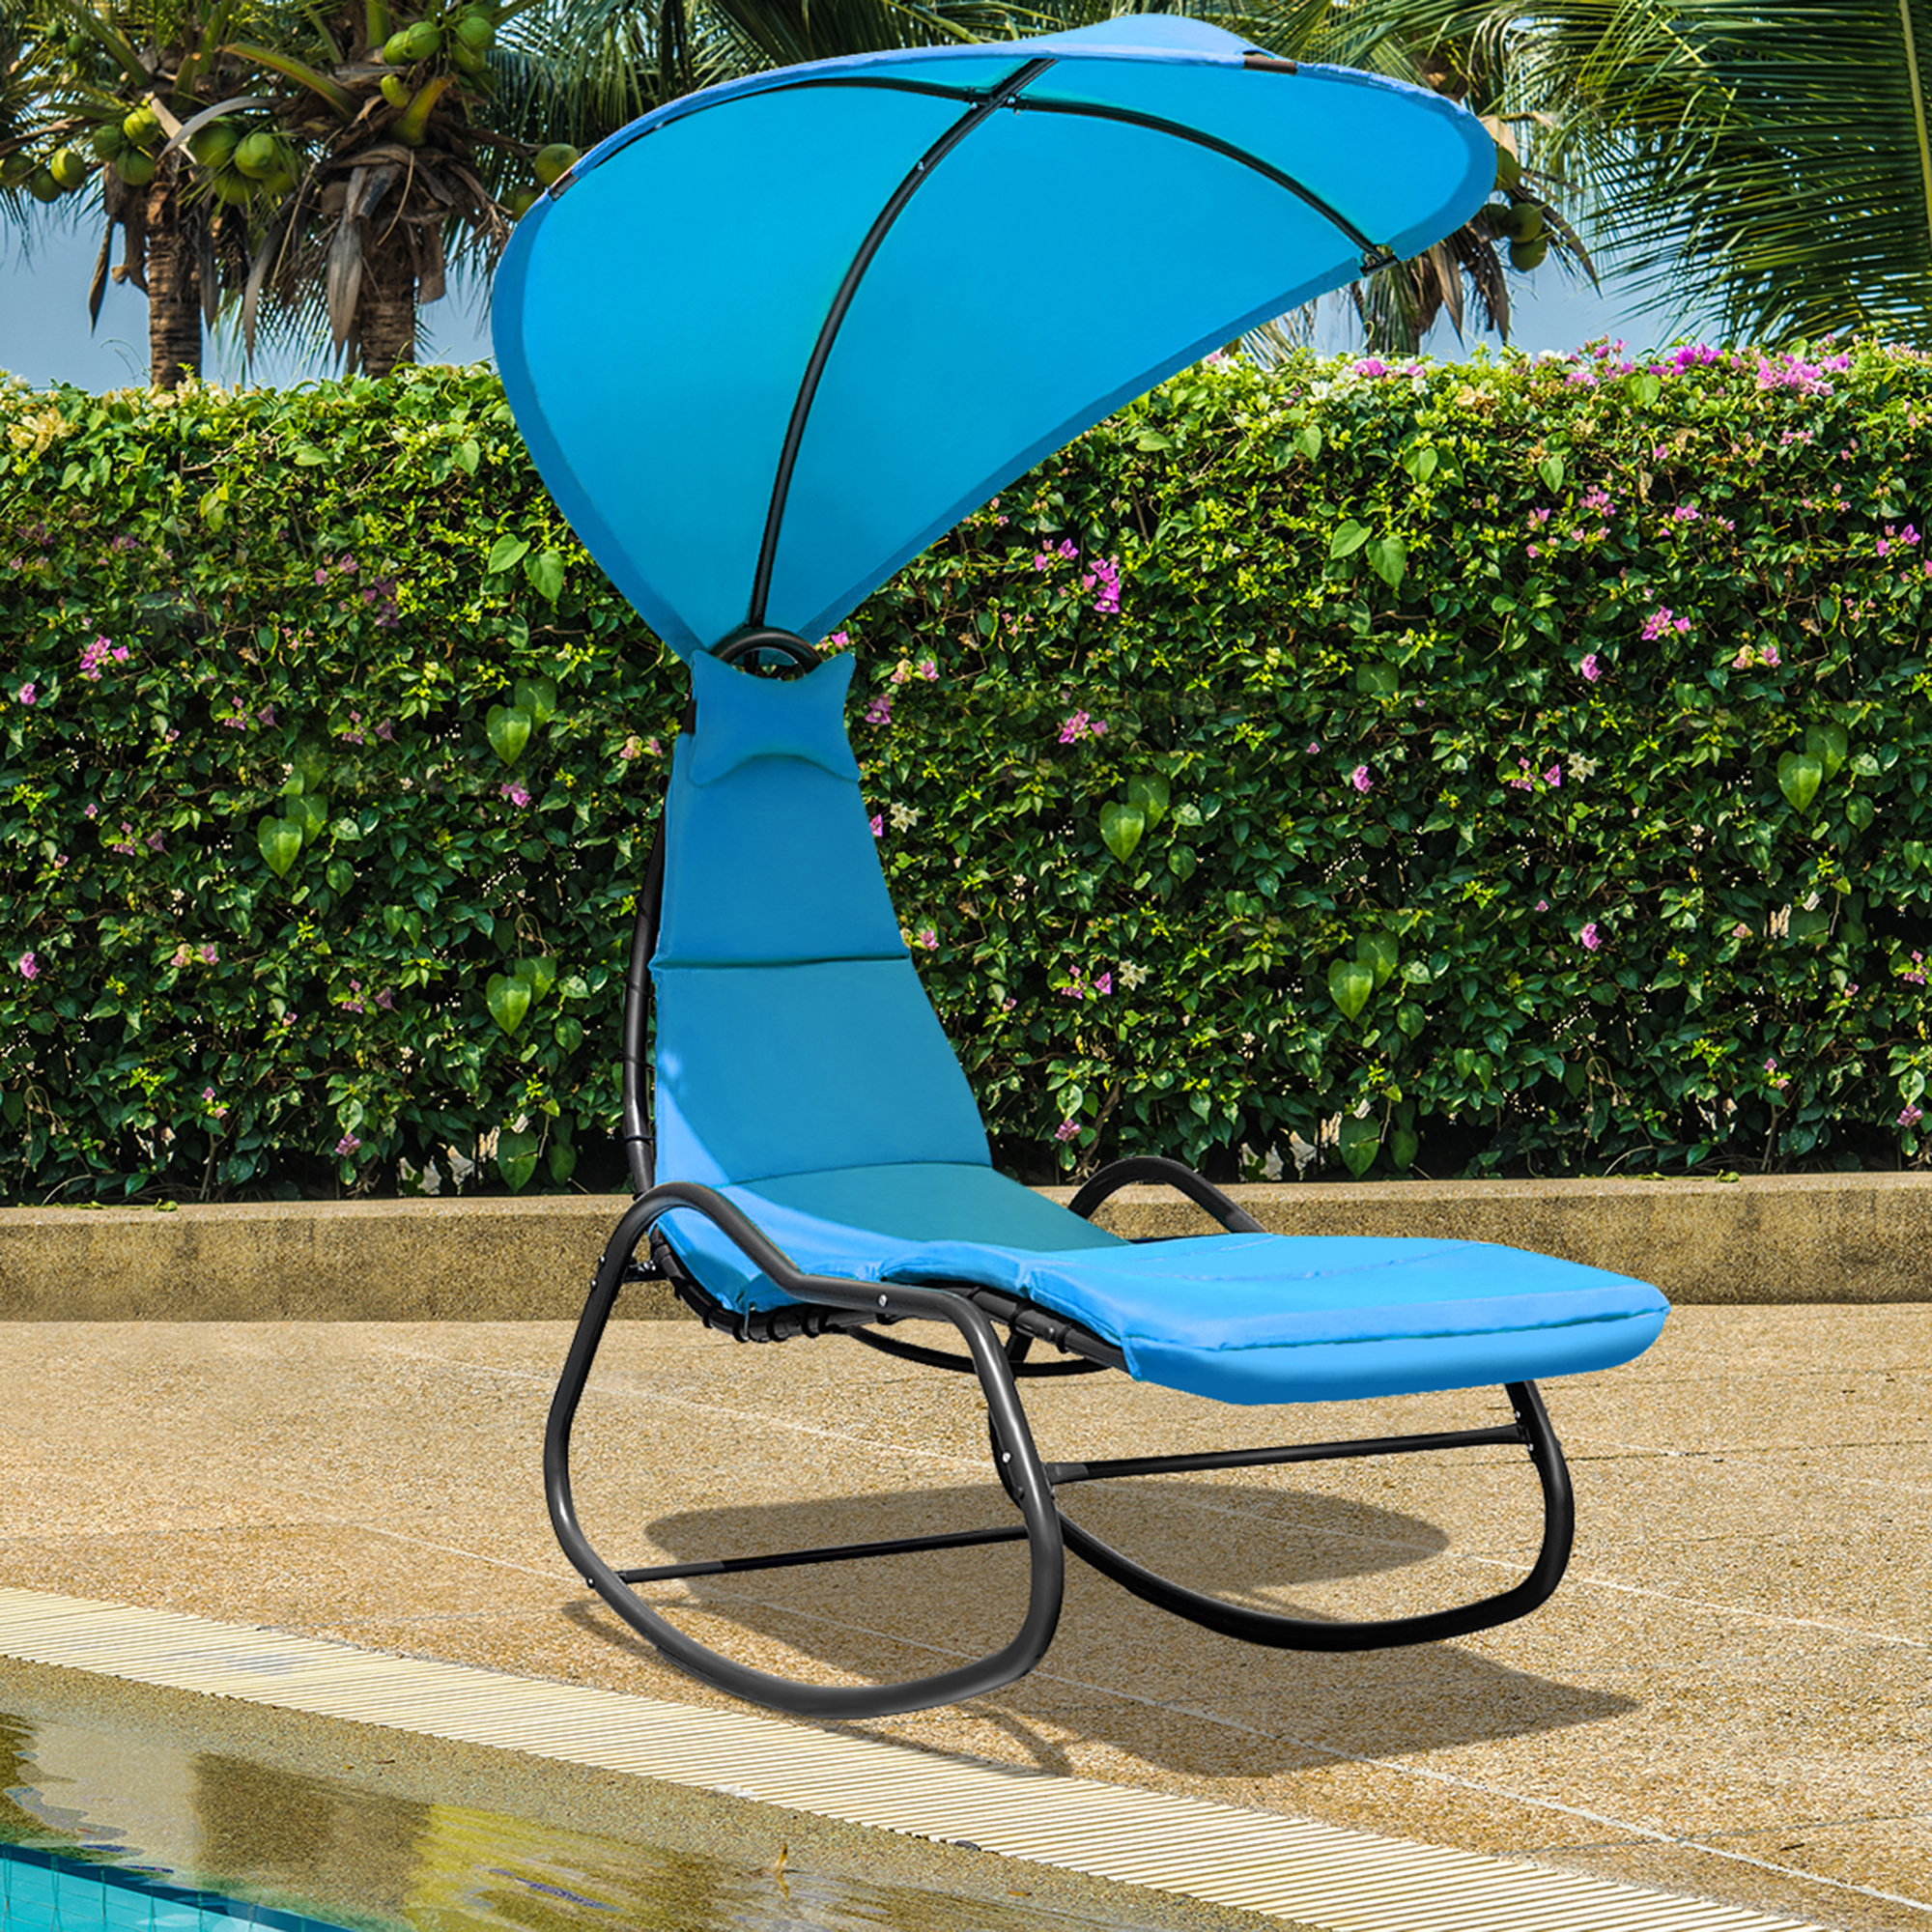 Gymax Patio Lounge Chair Chaise Garden w/ Steel Frame Cushion Canopy Turquoise - image 1 of 9